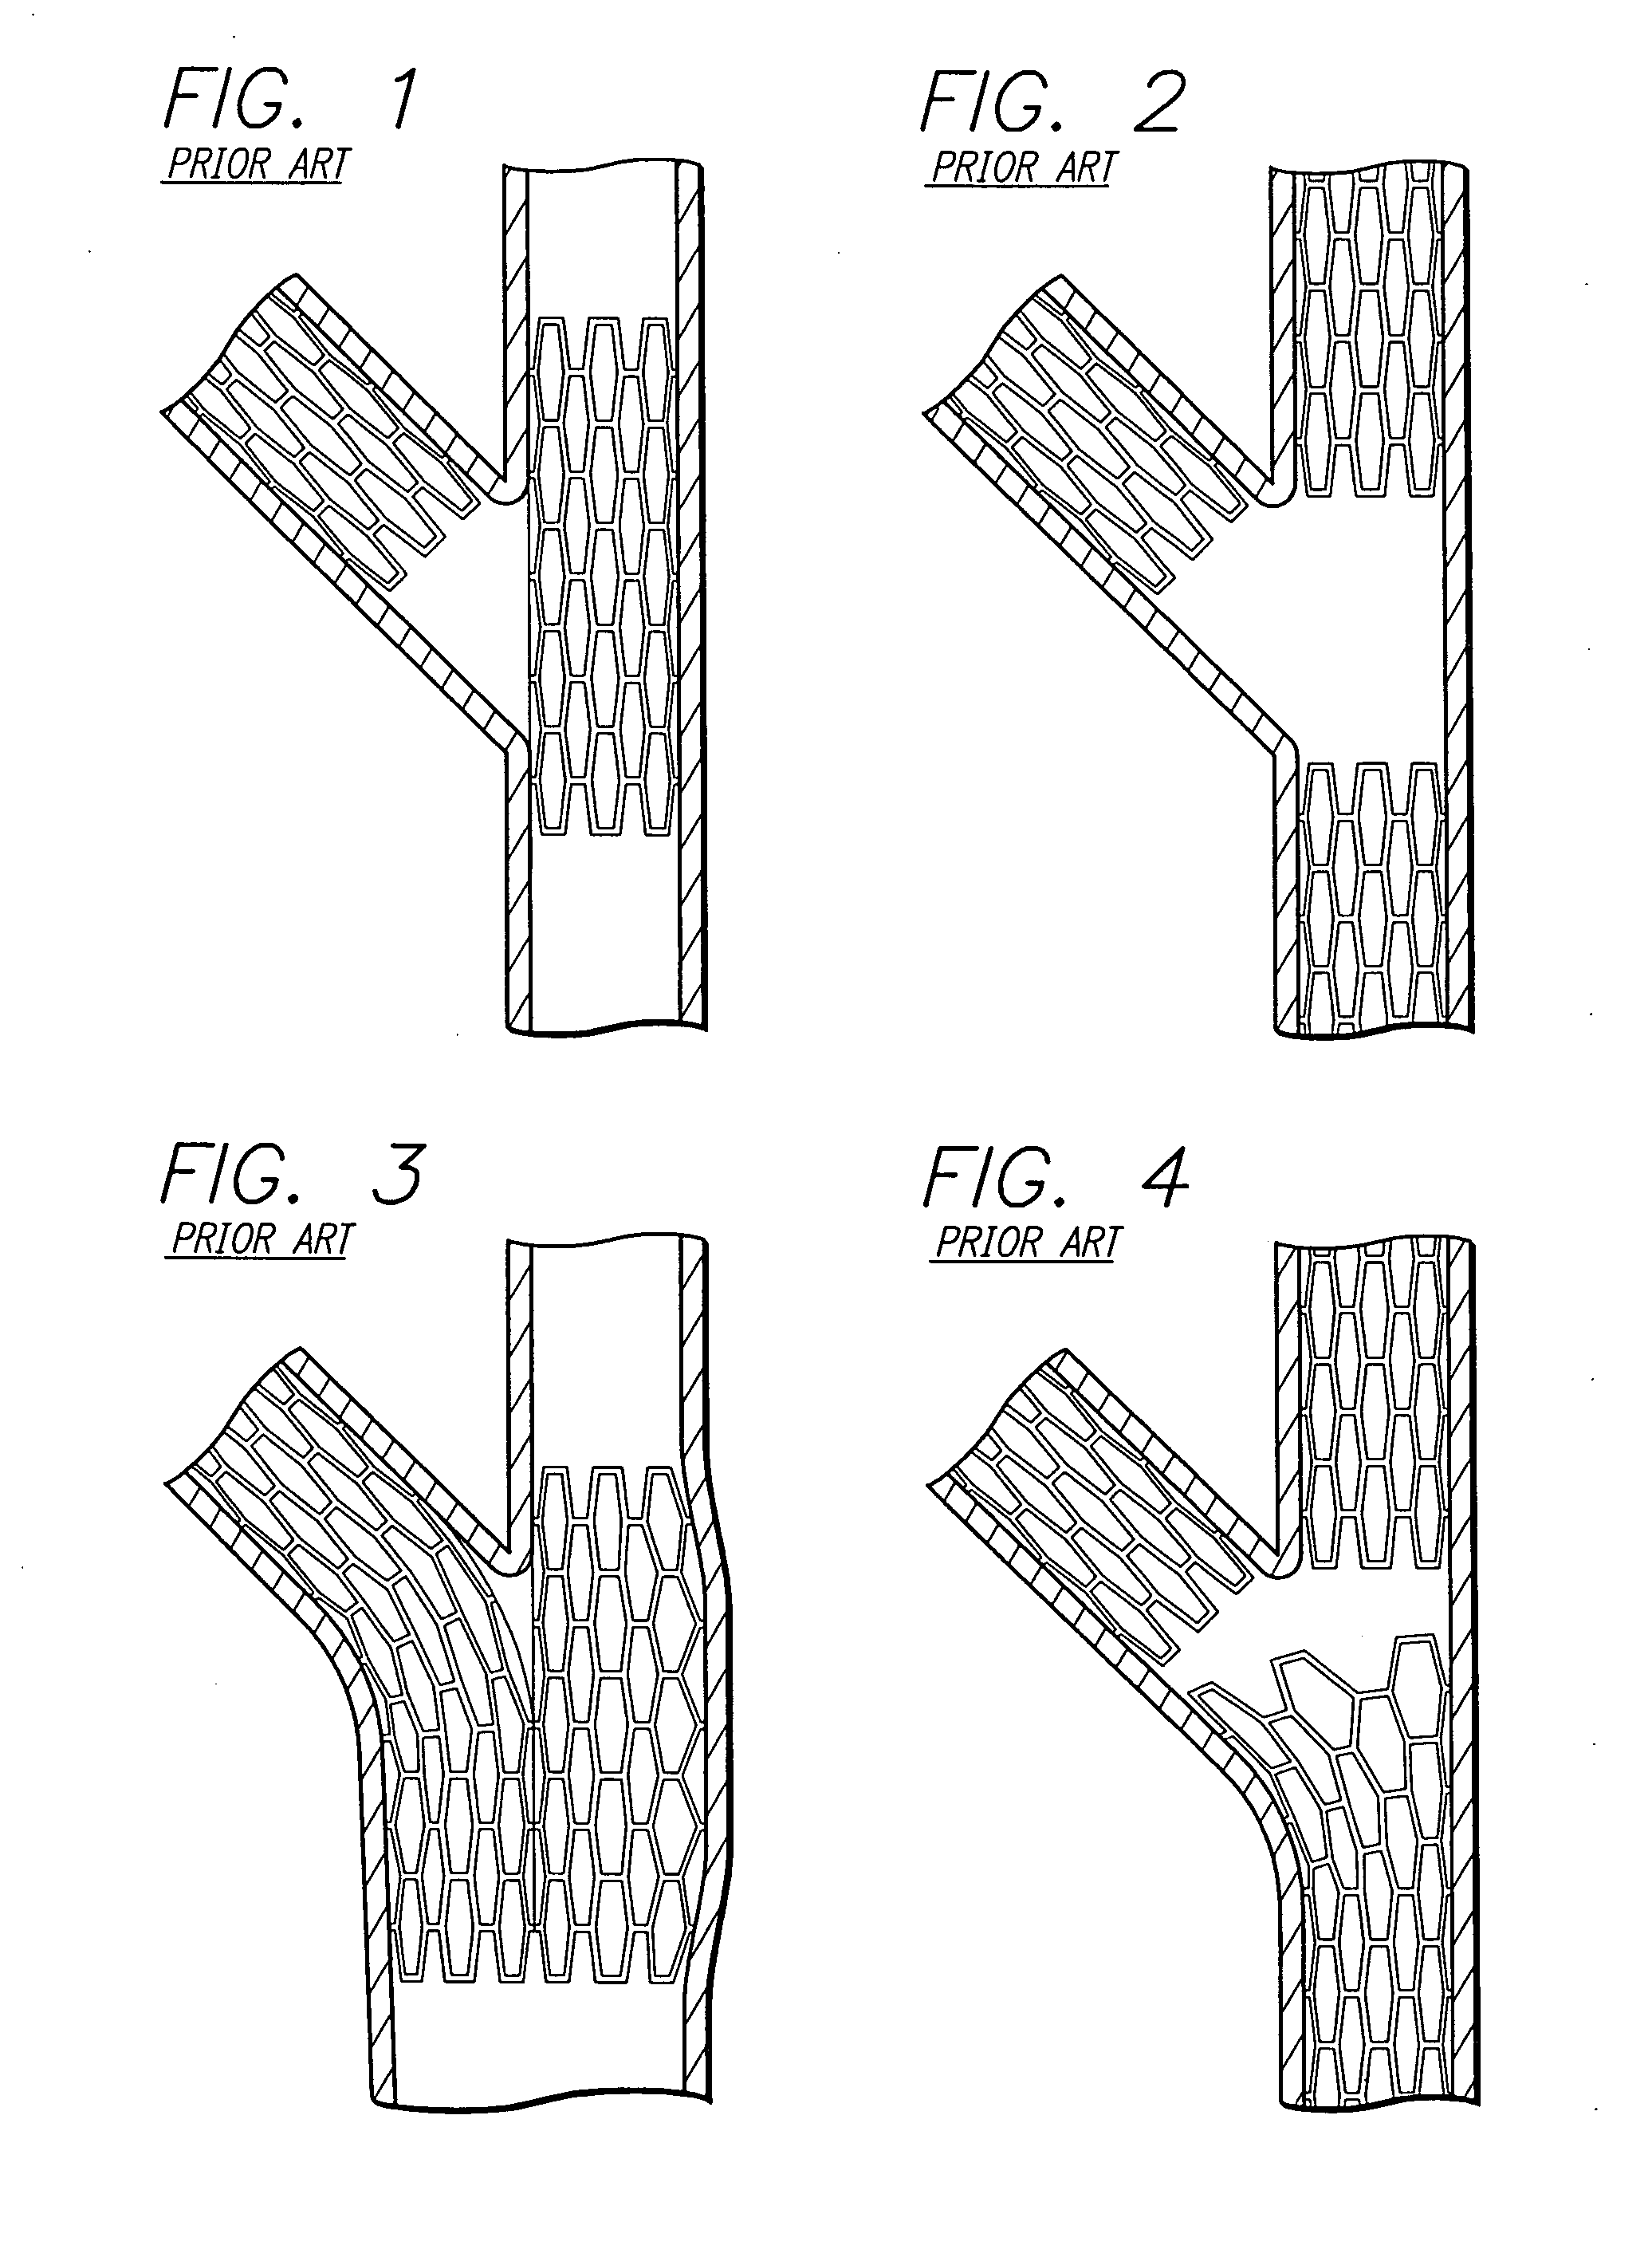 Stent and catheter assembly and method for treating bifurcations